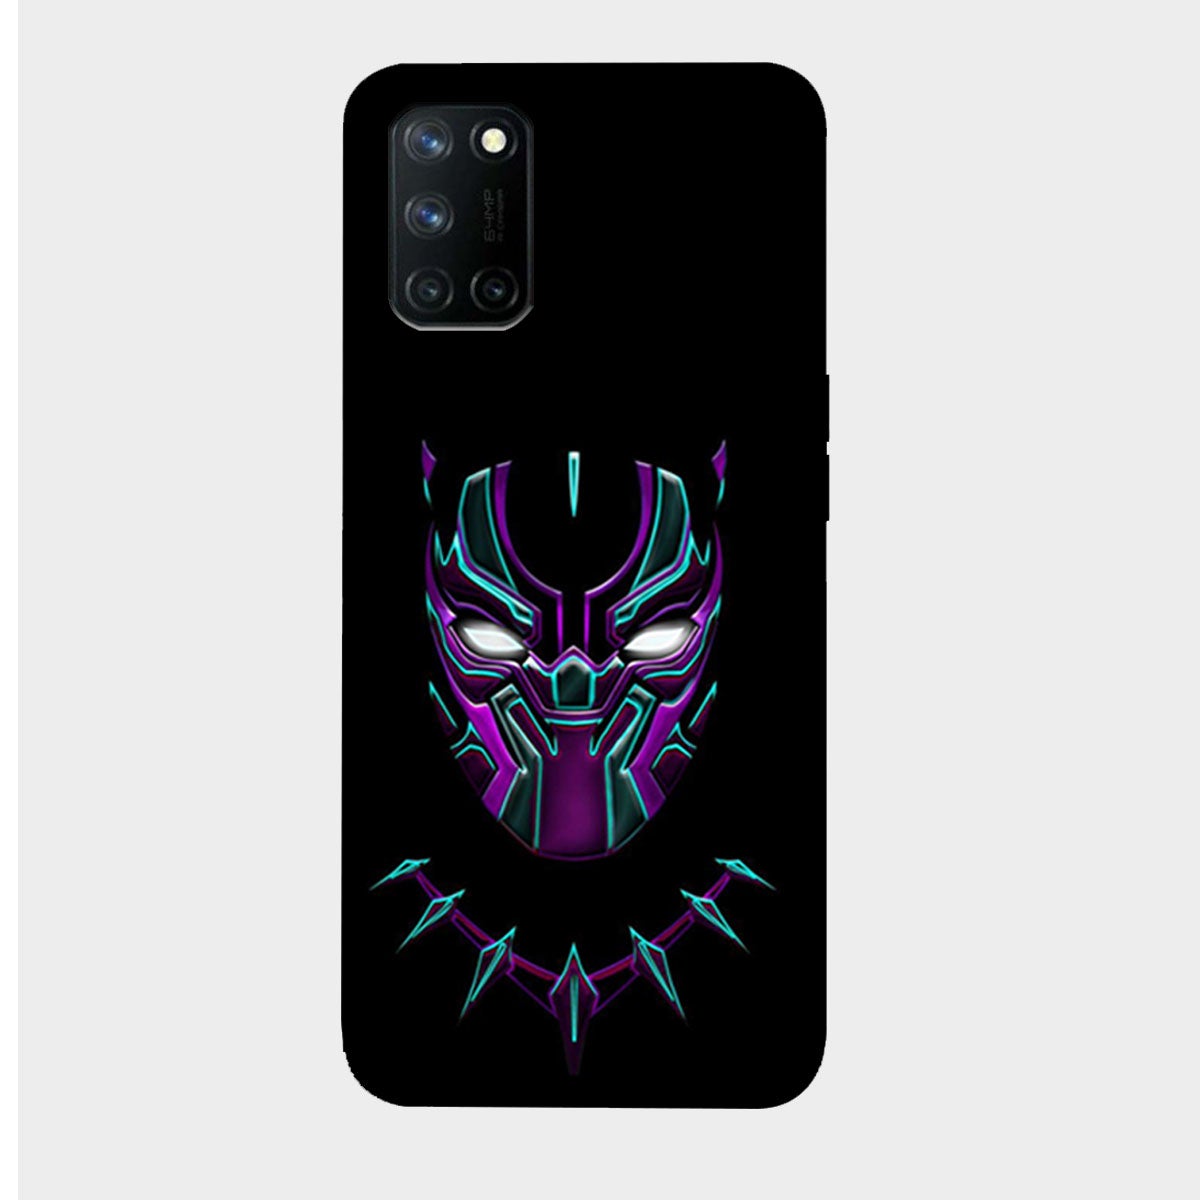 Black Panther - Mobile Phone Cover - Hard Case